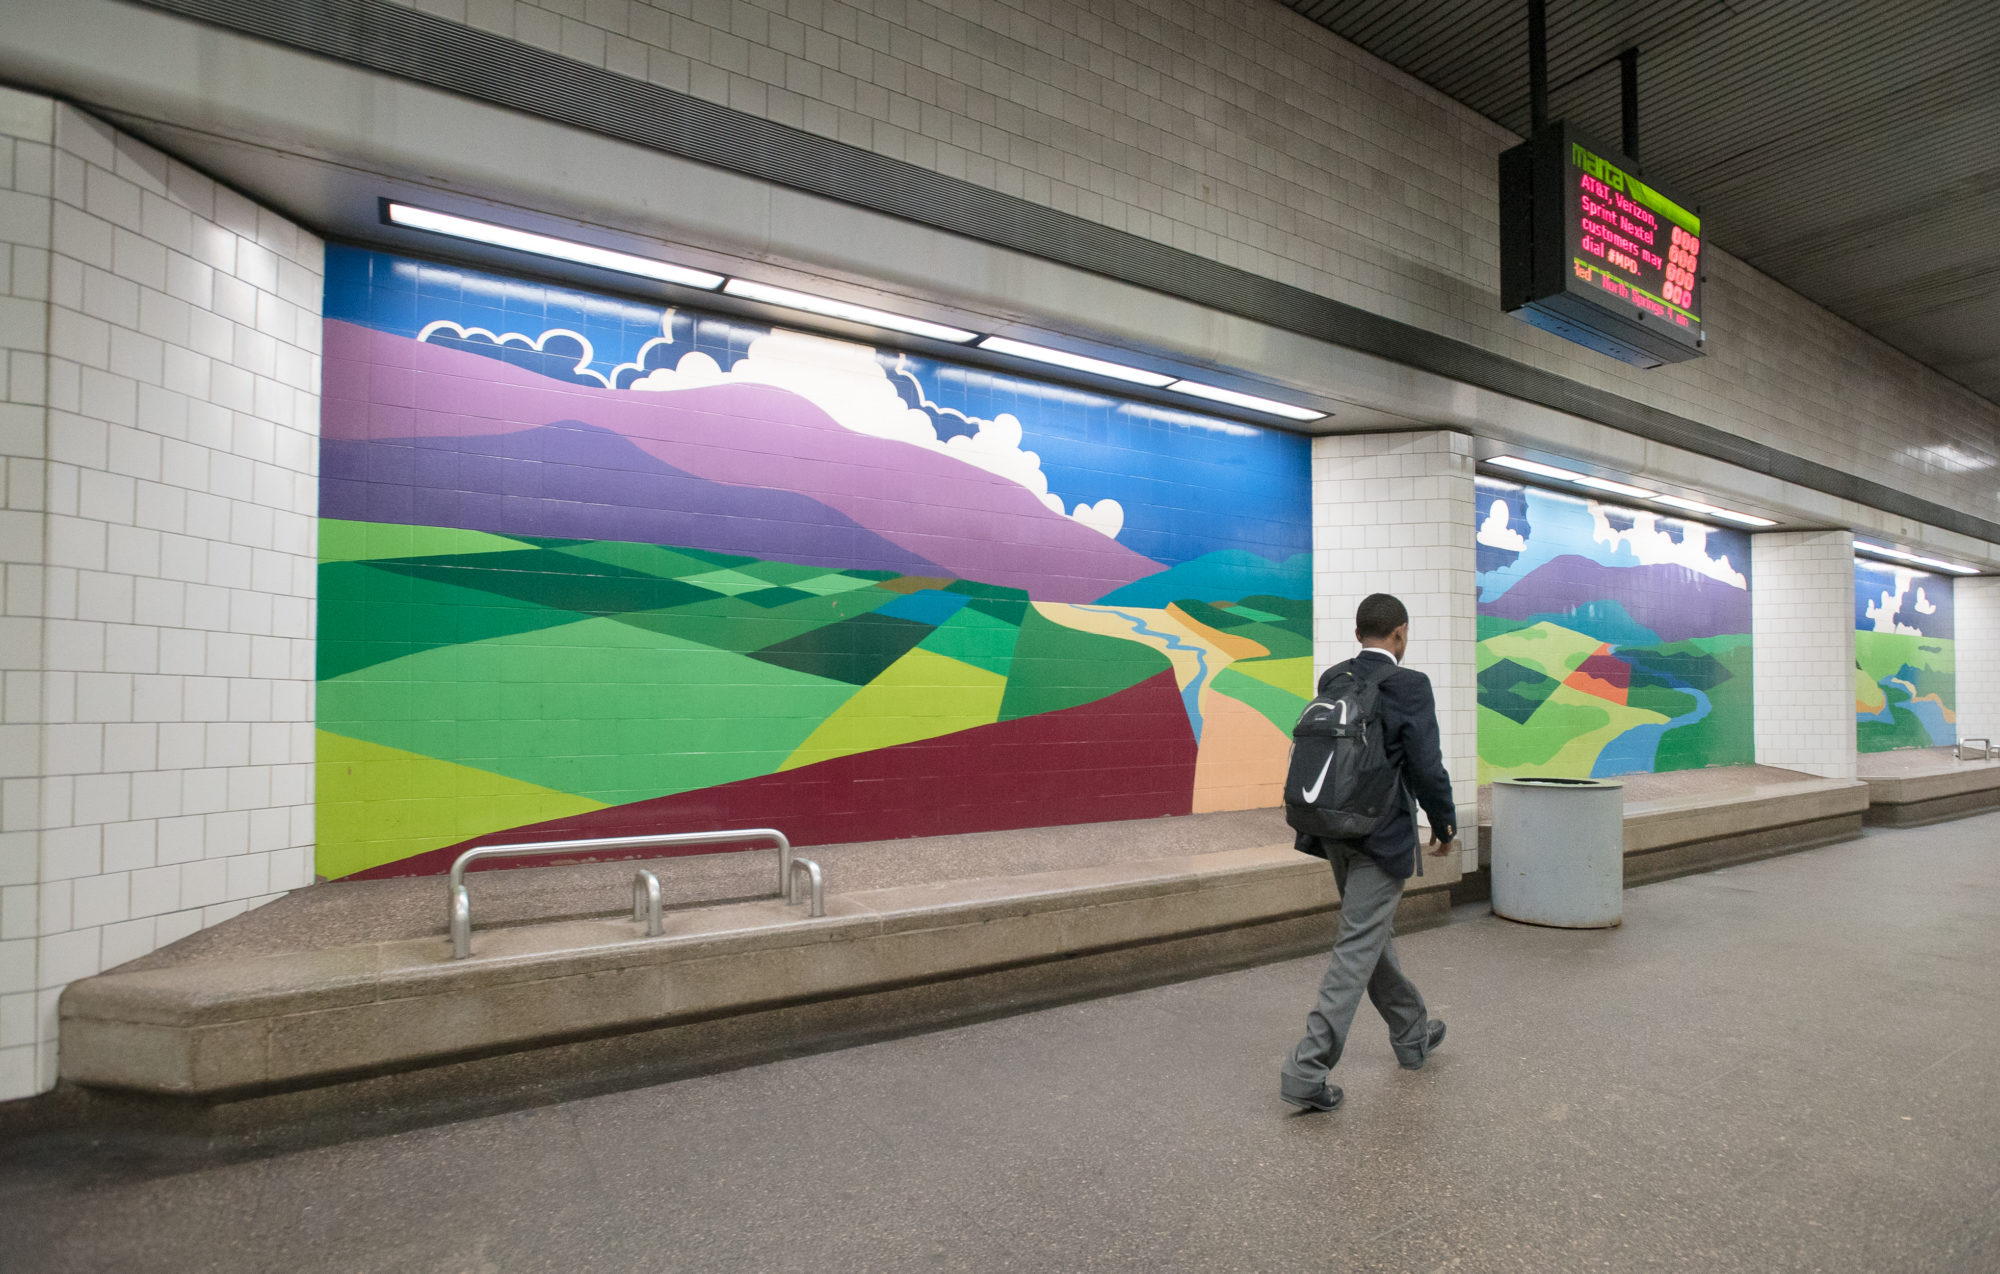 A man walks past colorfully painted murals at a train station